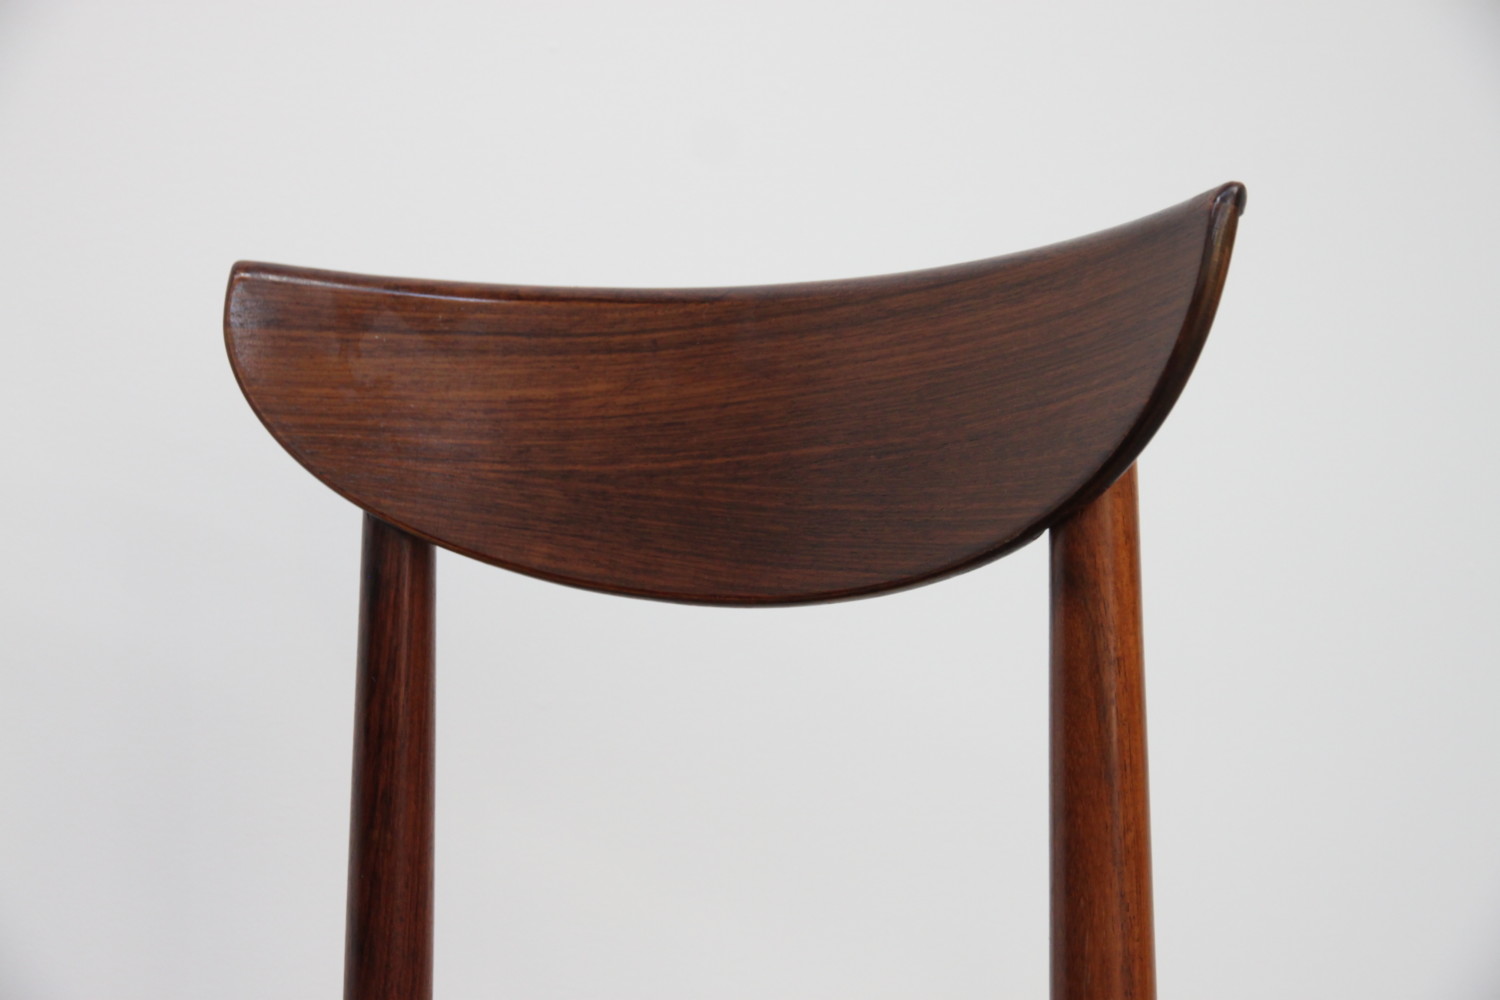 Dining Chairs By Skovby